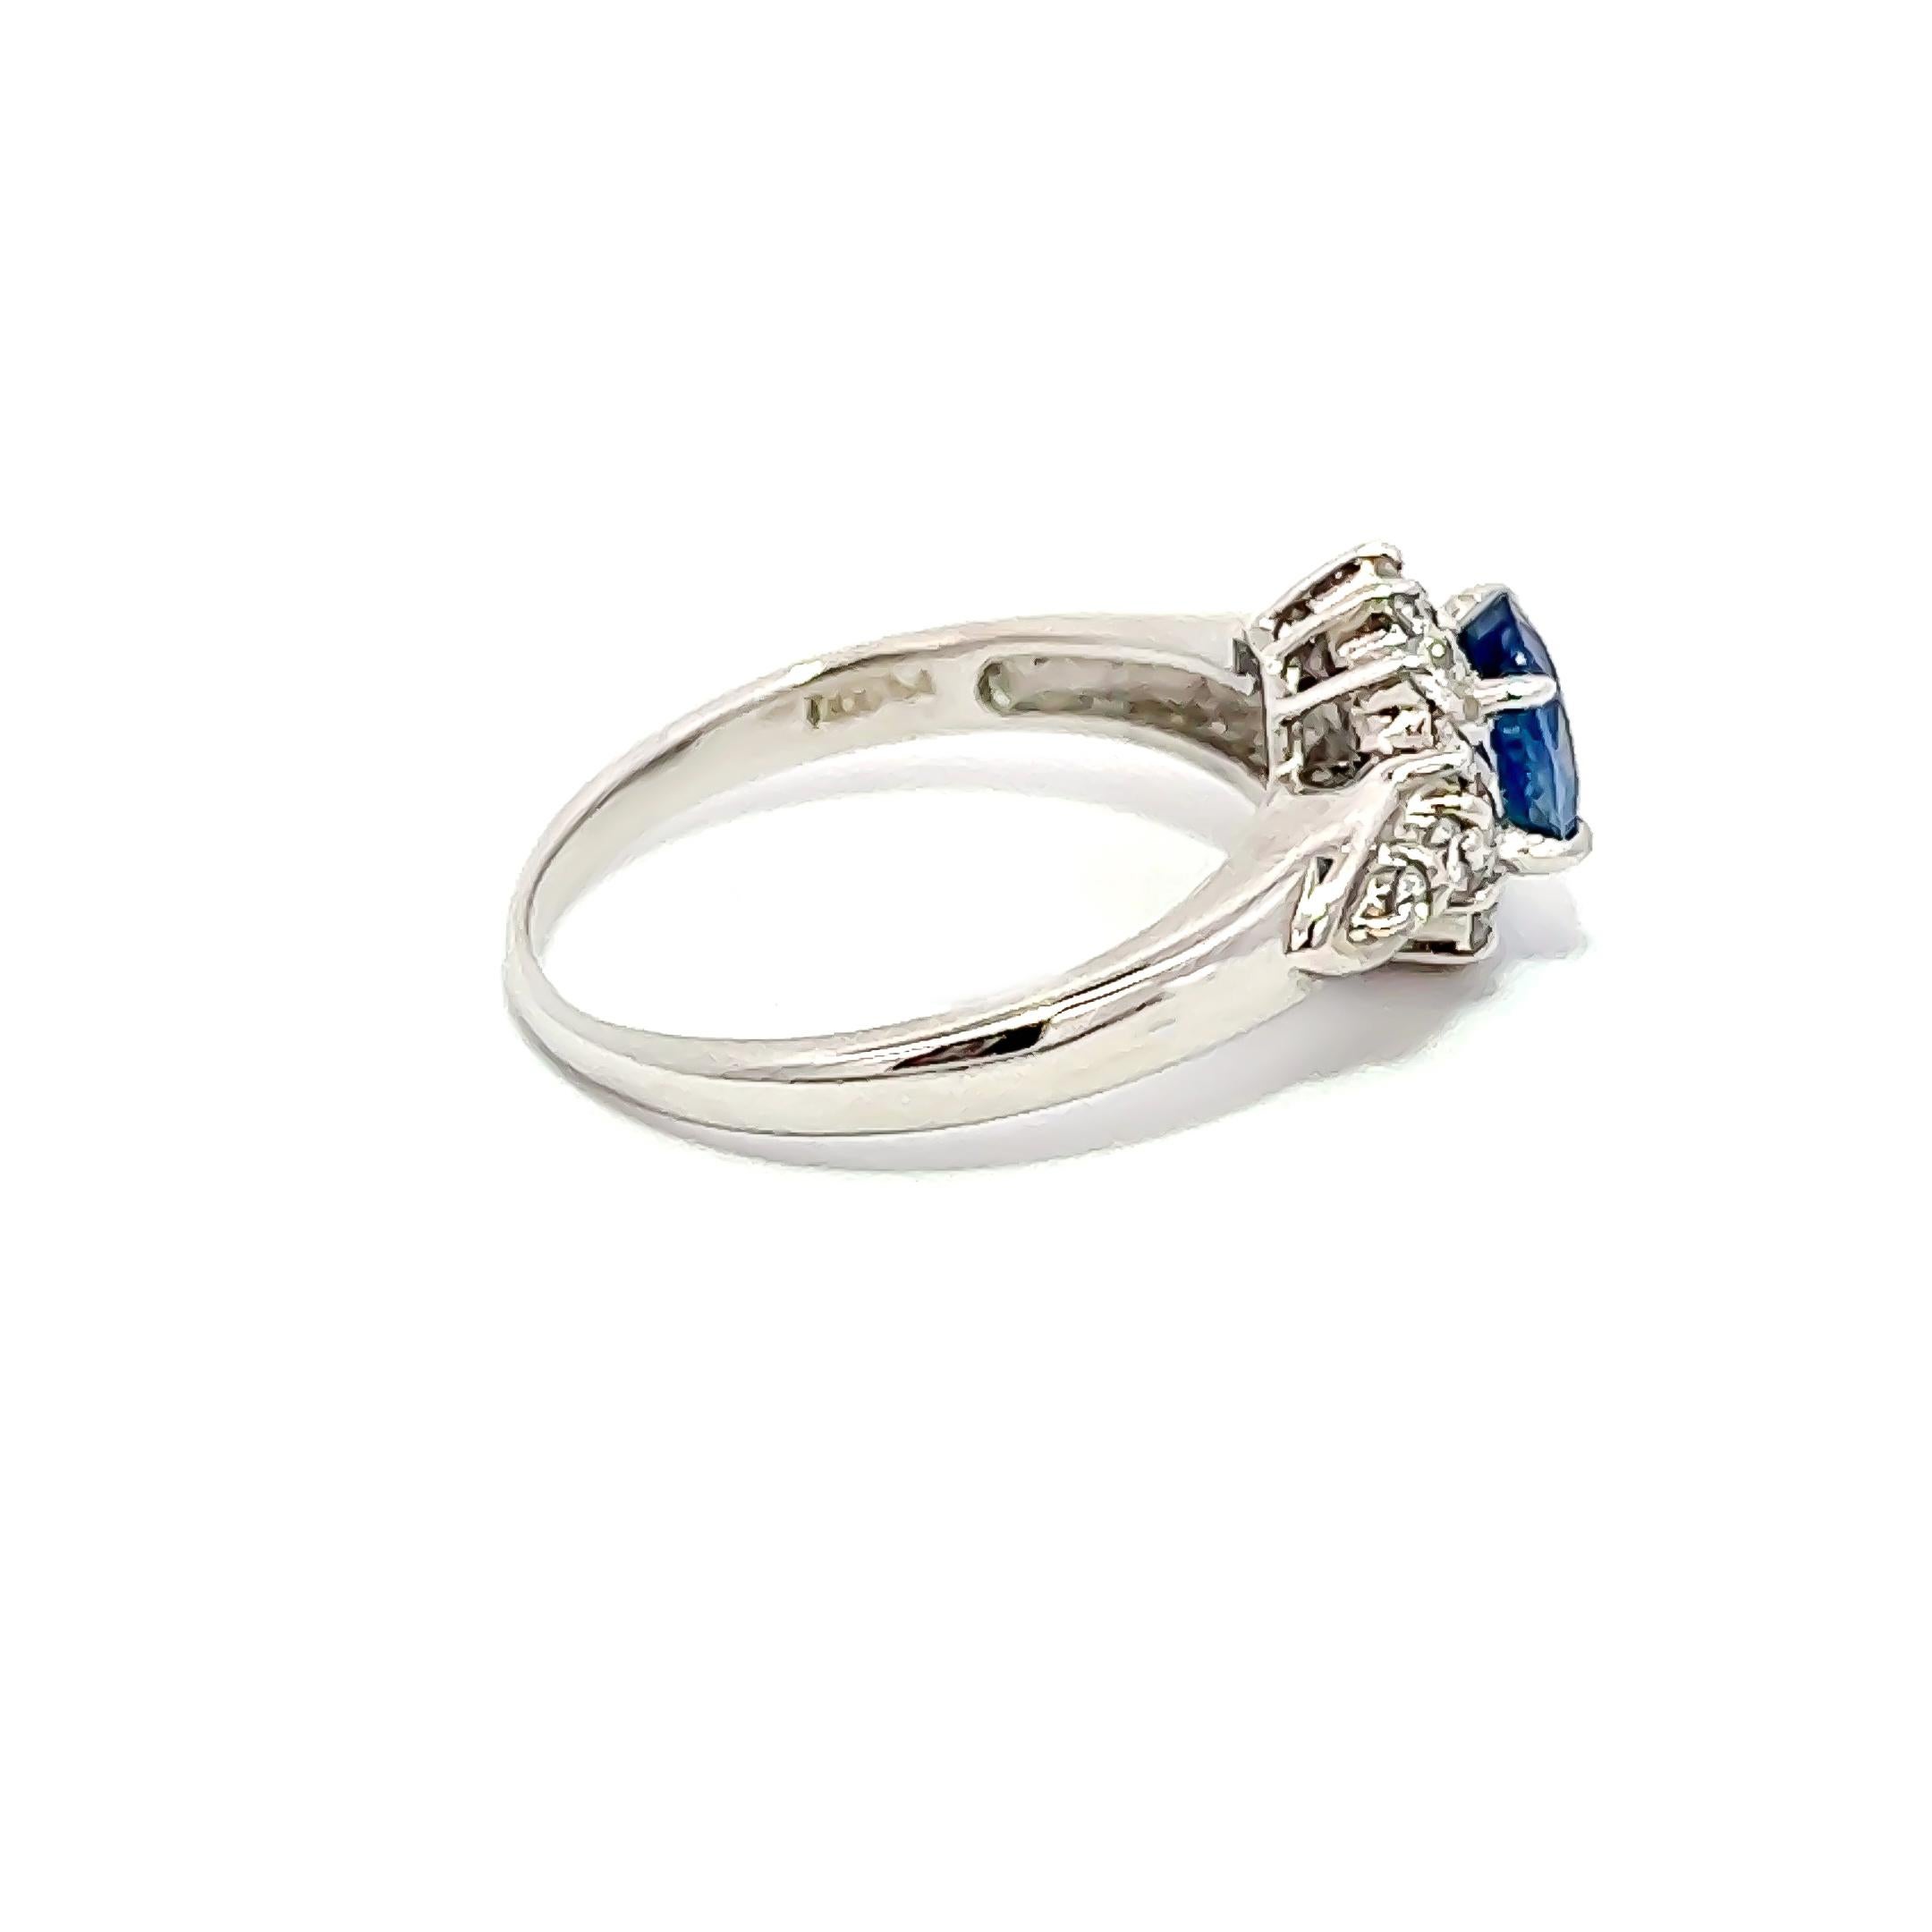 This exquisite ring showcases a magnificent 1.00CT blue sapphire perfectly complemented by 0.30CT round diamonds, all gracefully arranged in platinum. It is a truly timeless masterpiece that will surely become a cherished heirloom for generations to